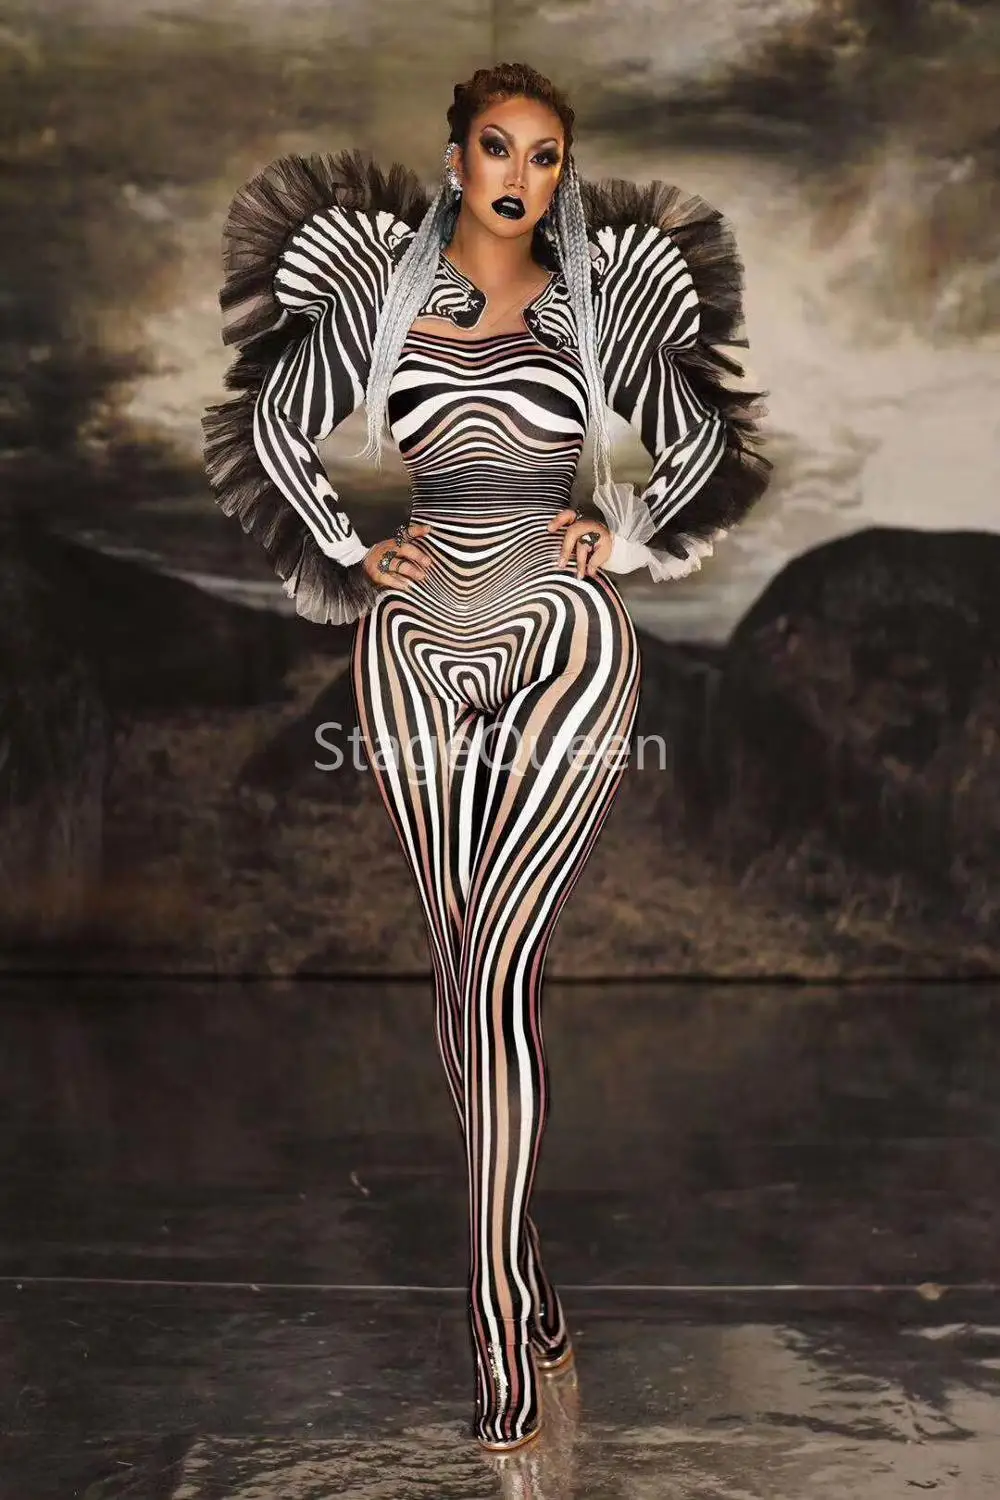 Sexy Stage Zebra Pattern Jumpsuit Women Singer Sexy Stage Outfit Bar DS Dance Cosplay Bodysuit Costume Prom Costume